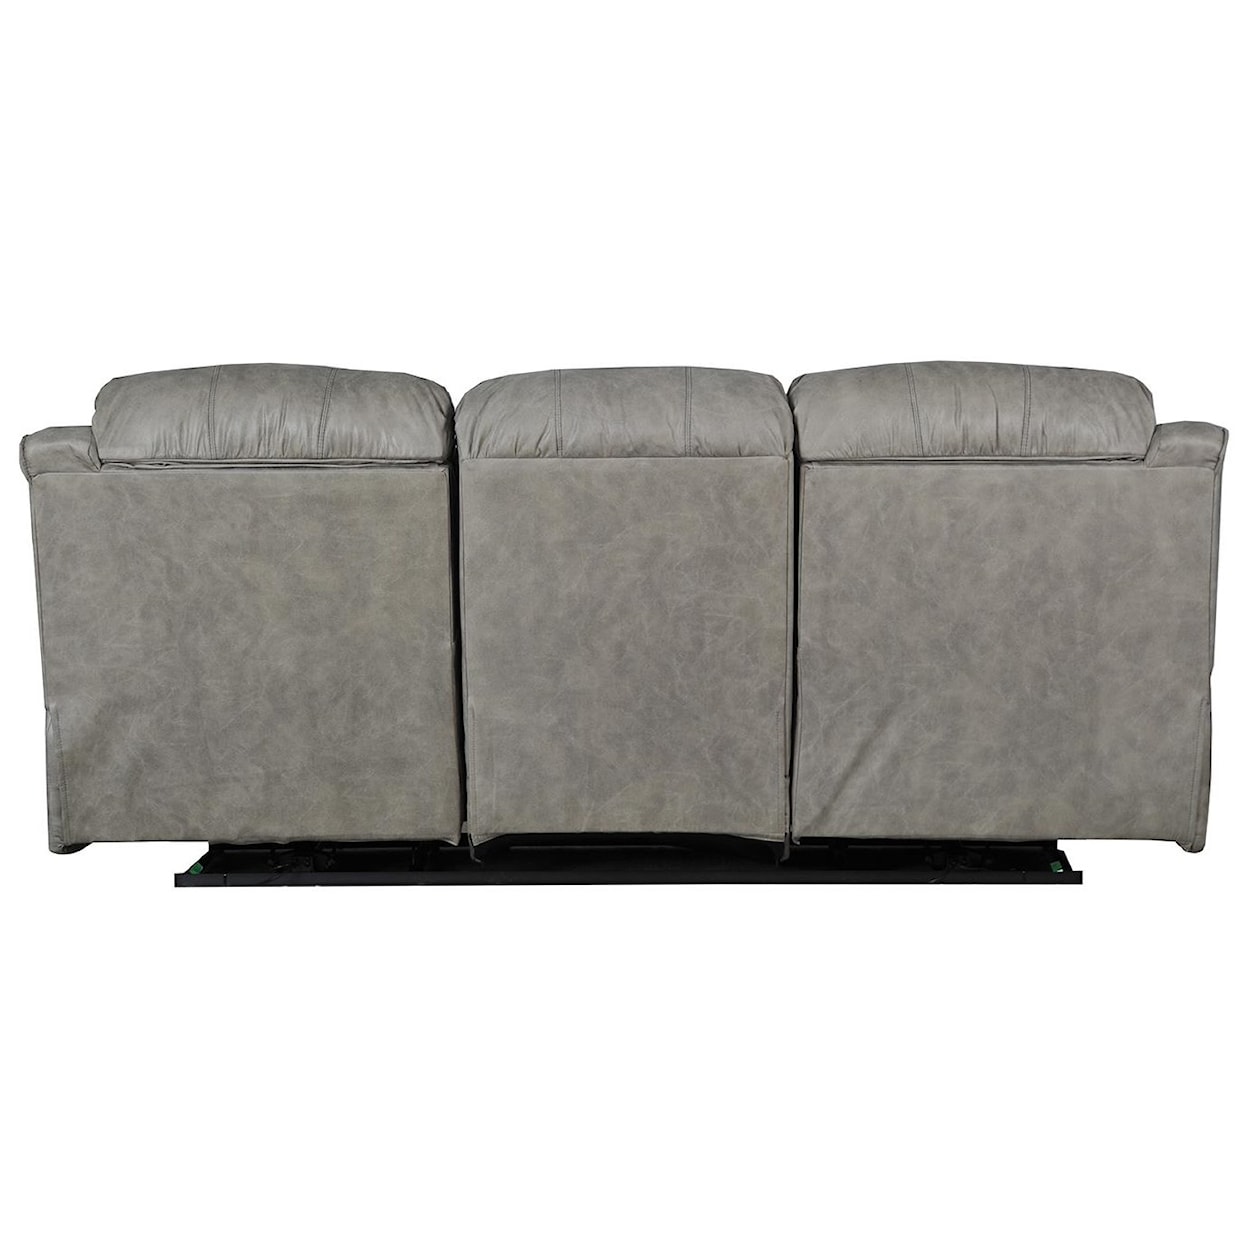 Southern Motion Cagney Power Reclining Sofa